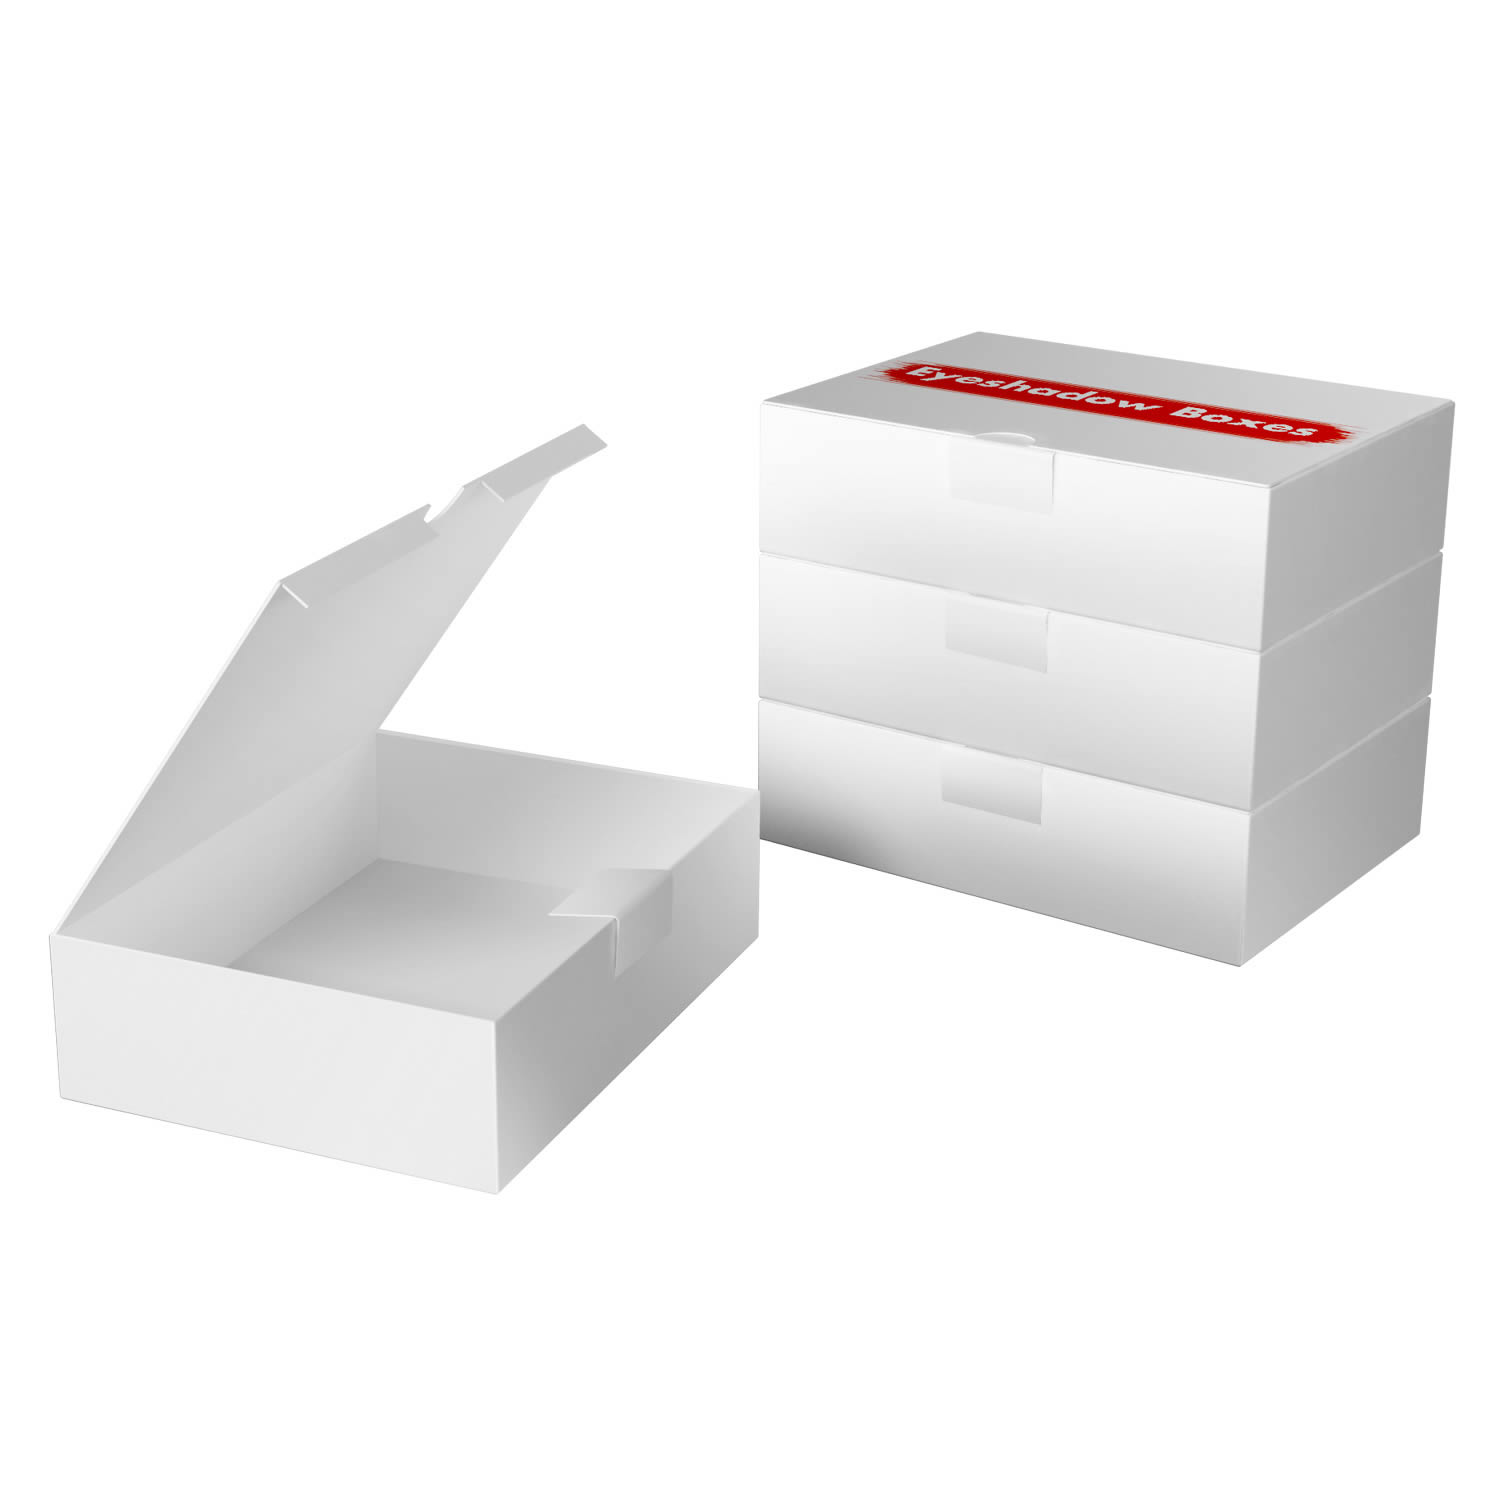 How to Design Packaging Box?